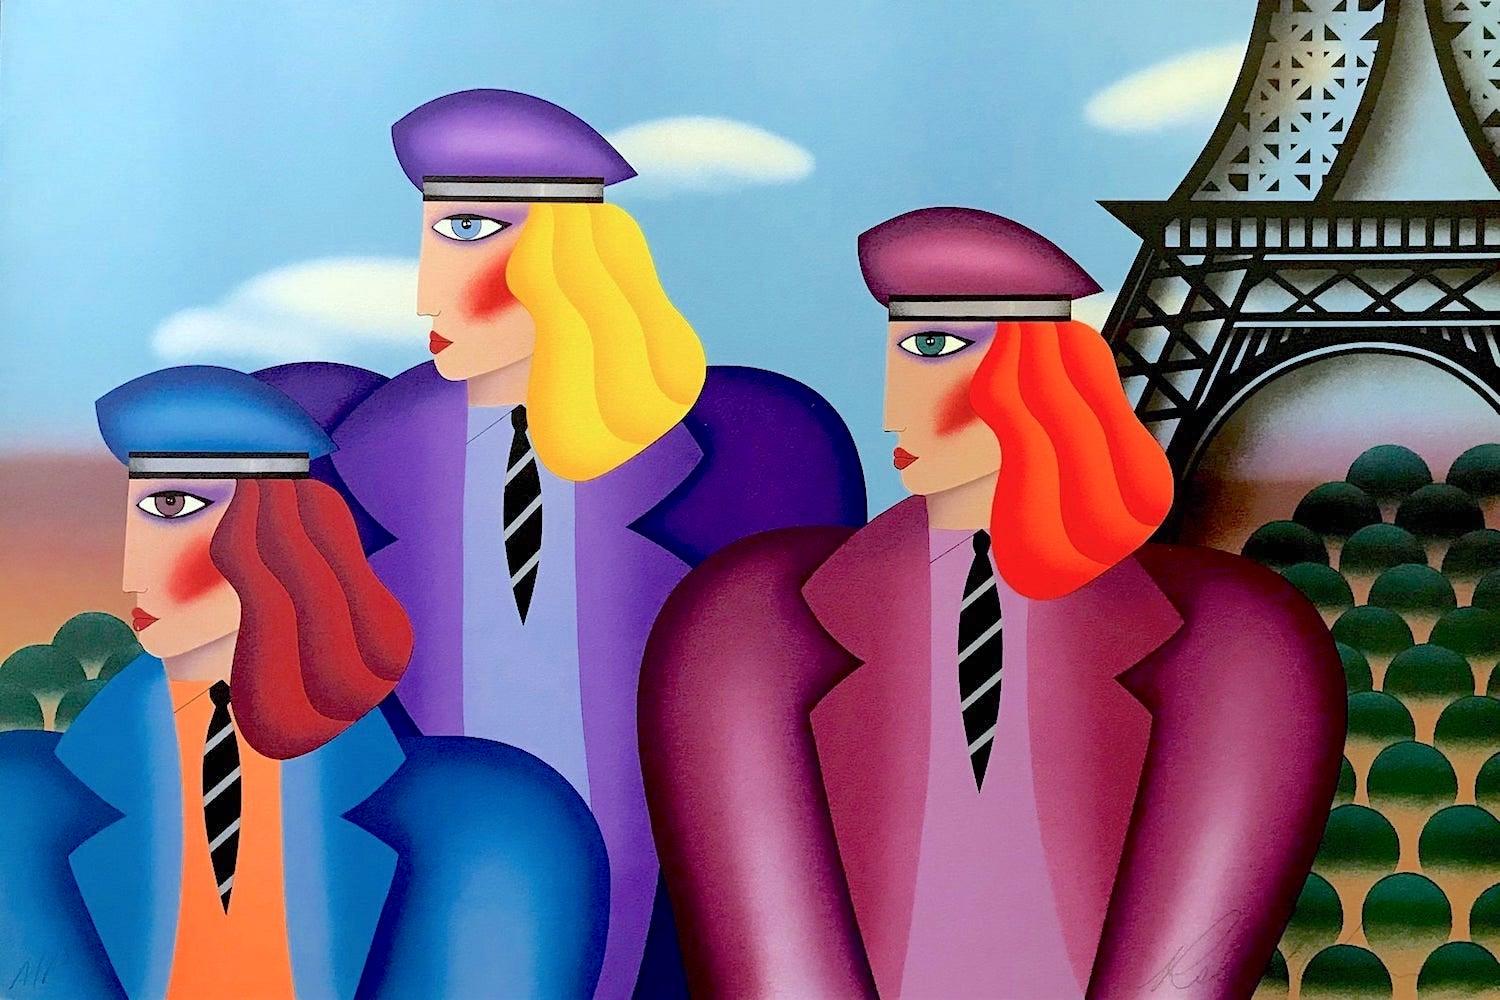 PARIS RAGE Signed Lithograph, Three Women, Color Berets, Neckties, Eiffel Tower 